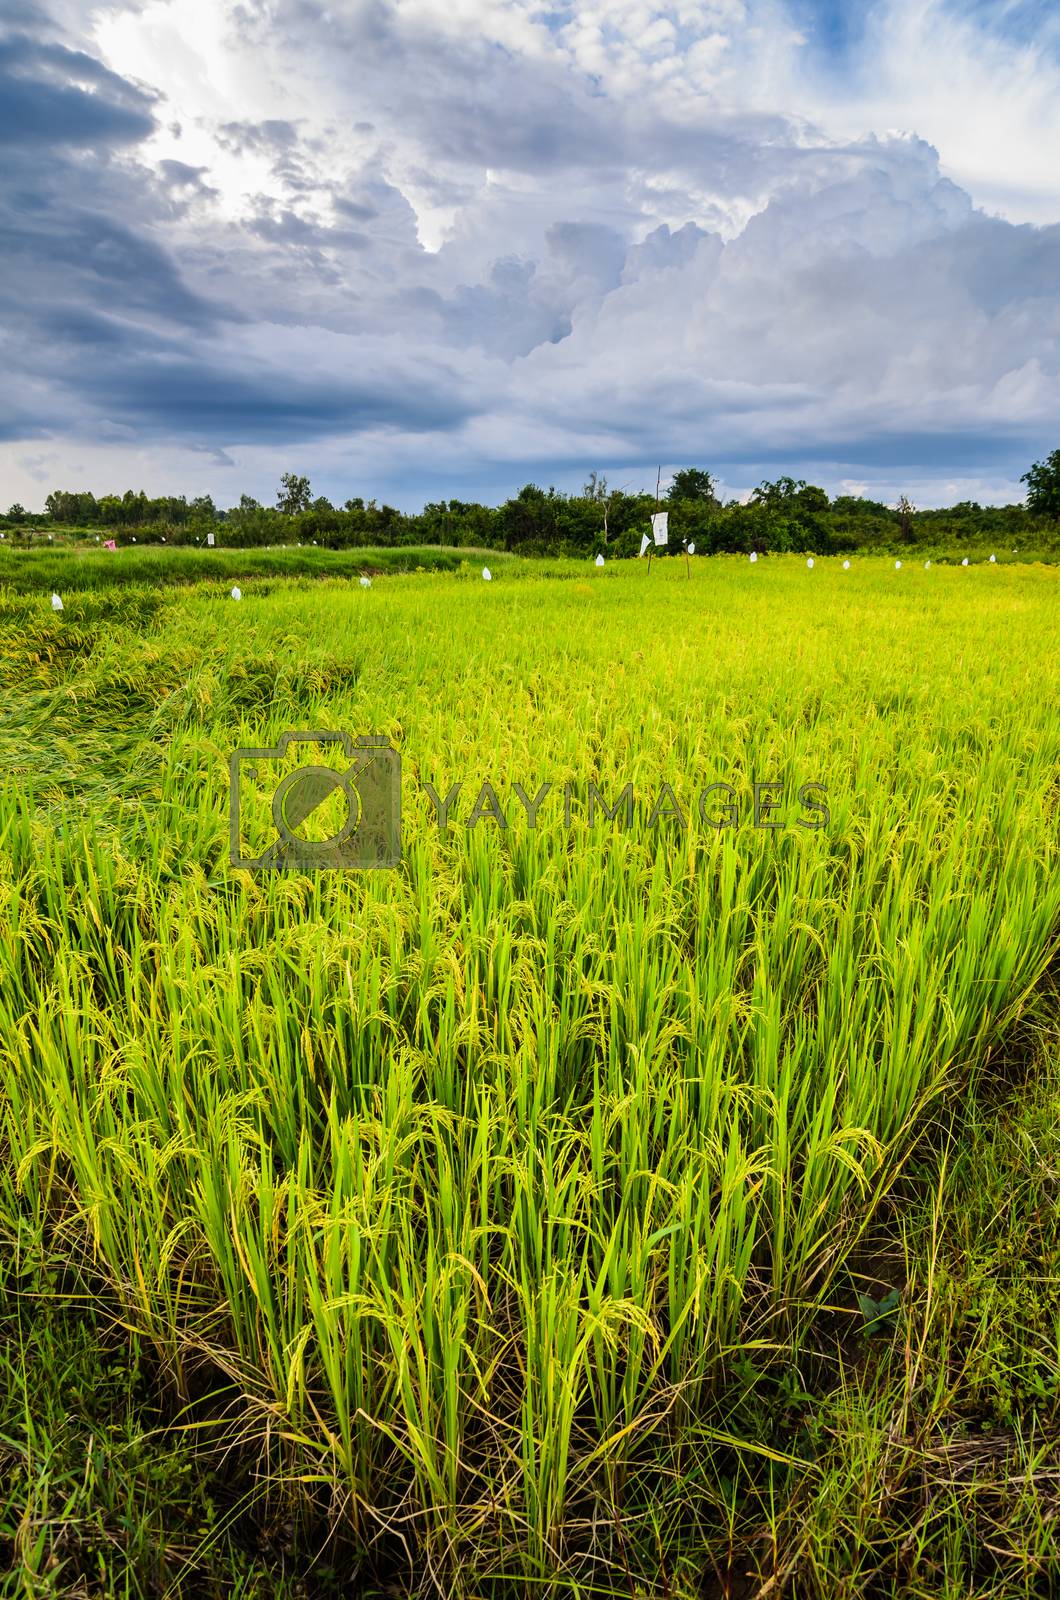 Royalty free image of Rice field by sweetcrisis